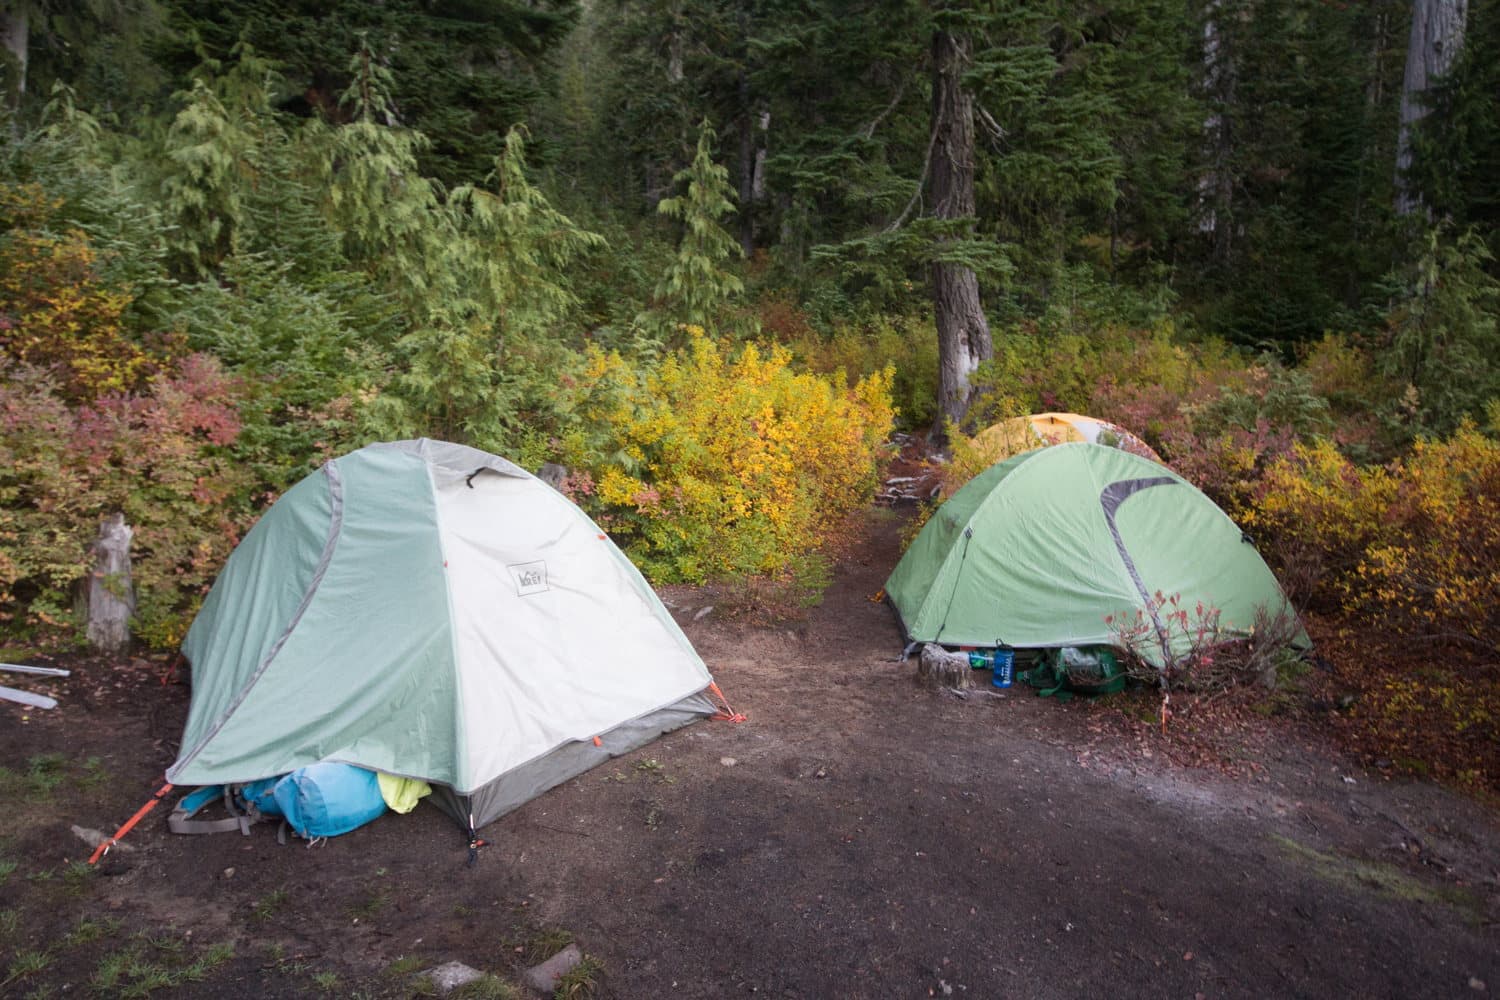 We found the perfect campground, with just enough space for our tents